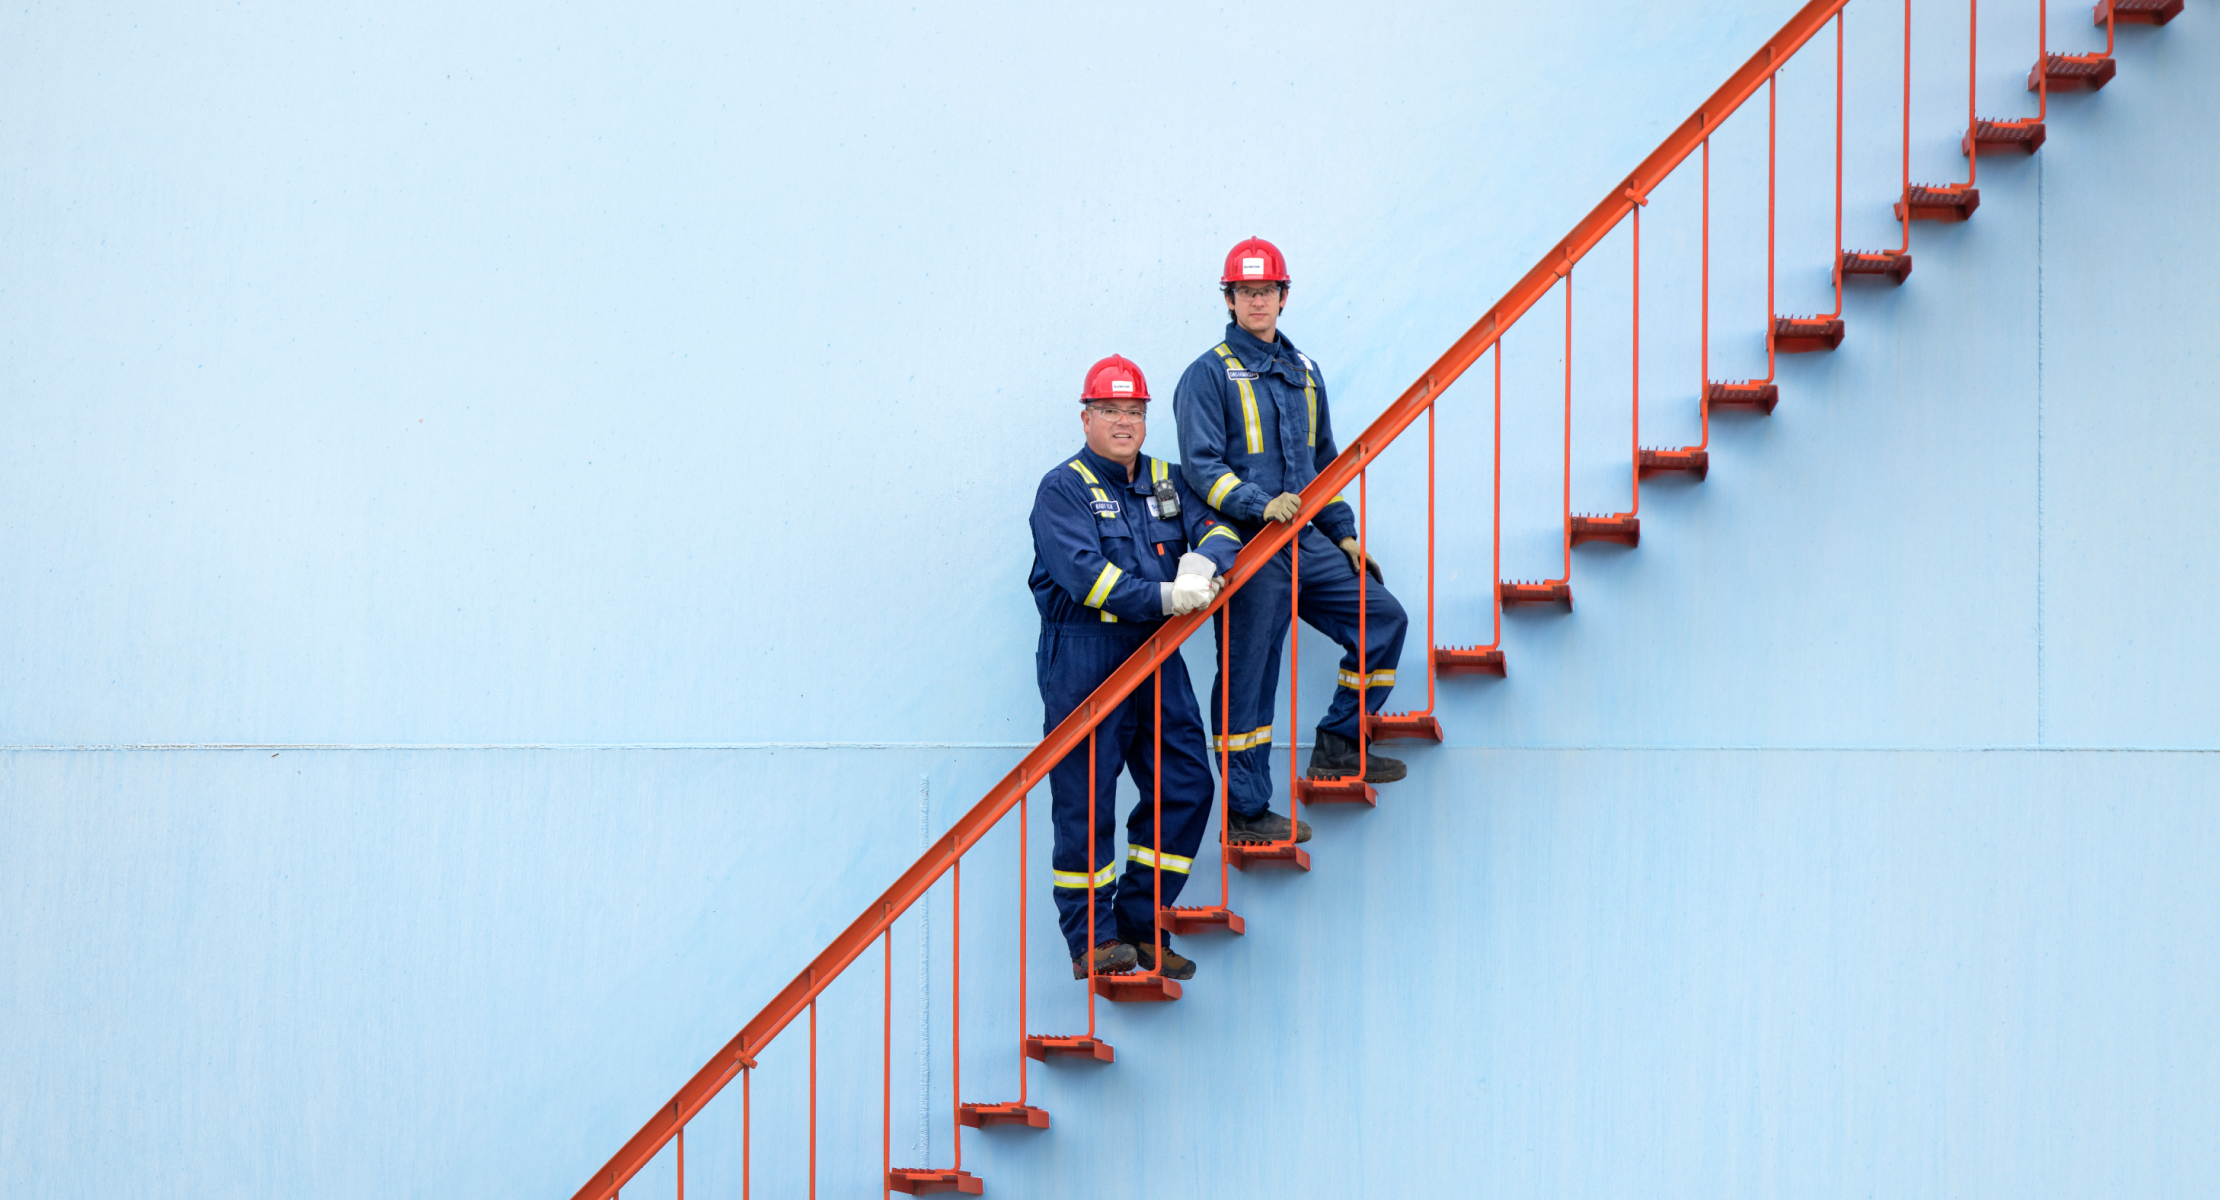 Two people wearing red hard hats and protective clothing standing on a red metal staircase at an operating facility.